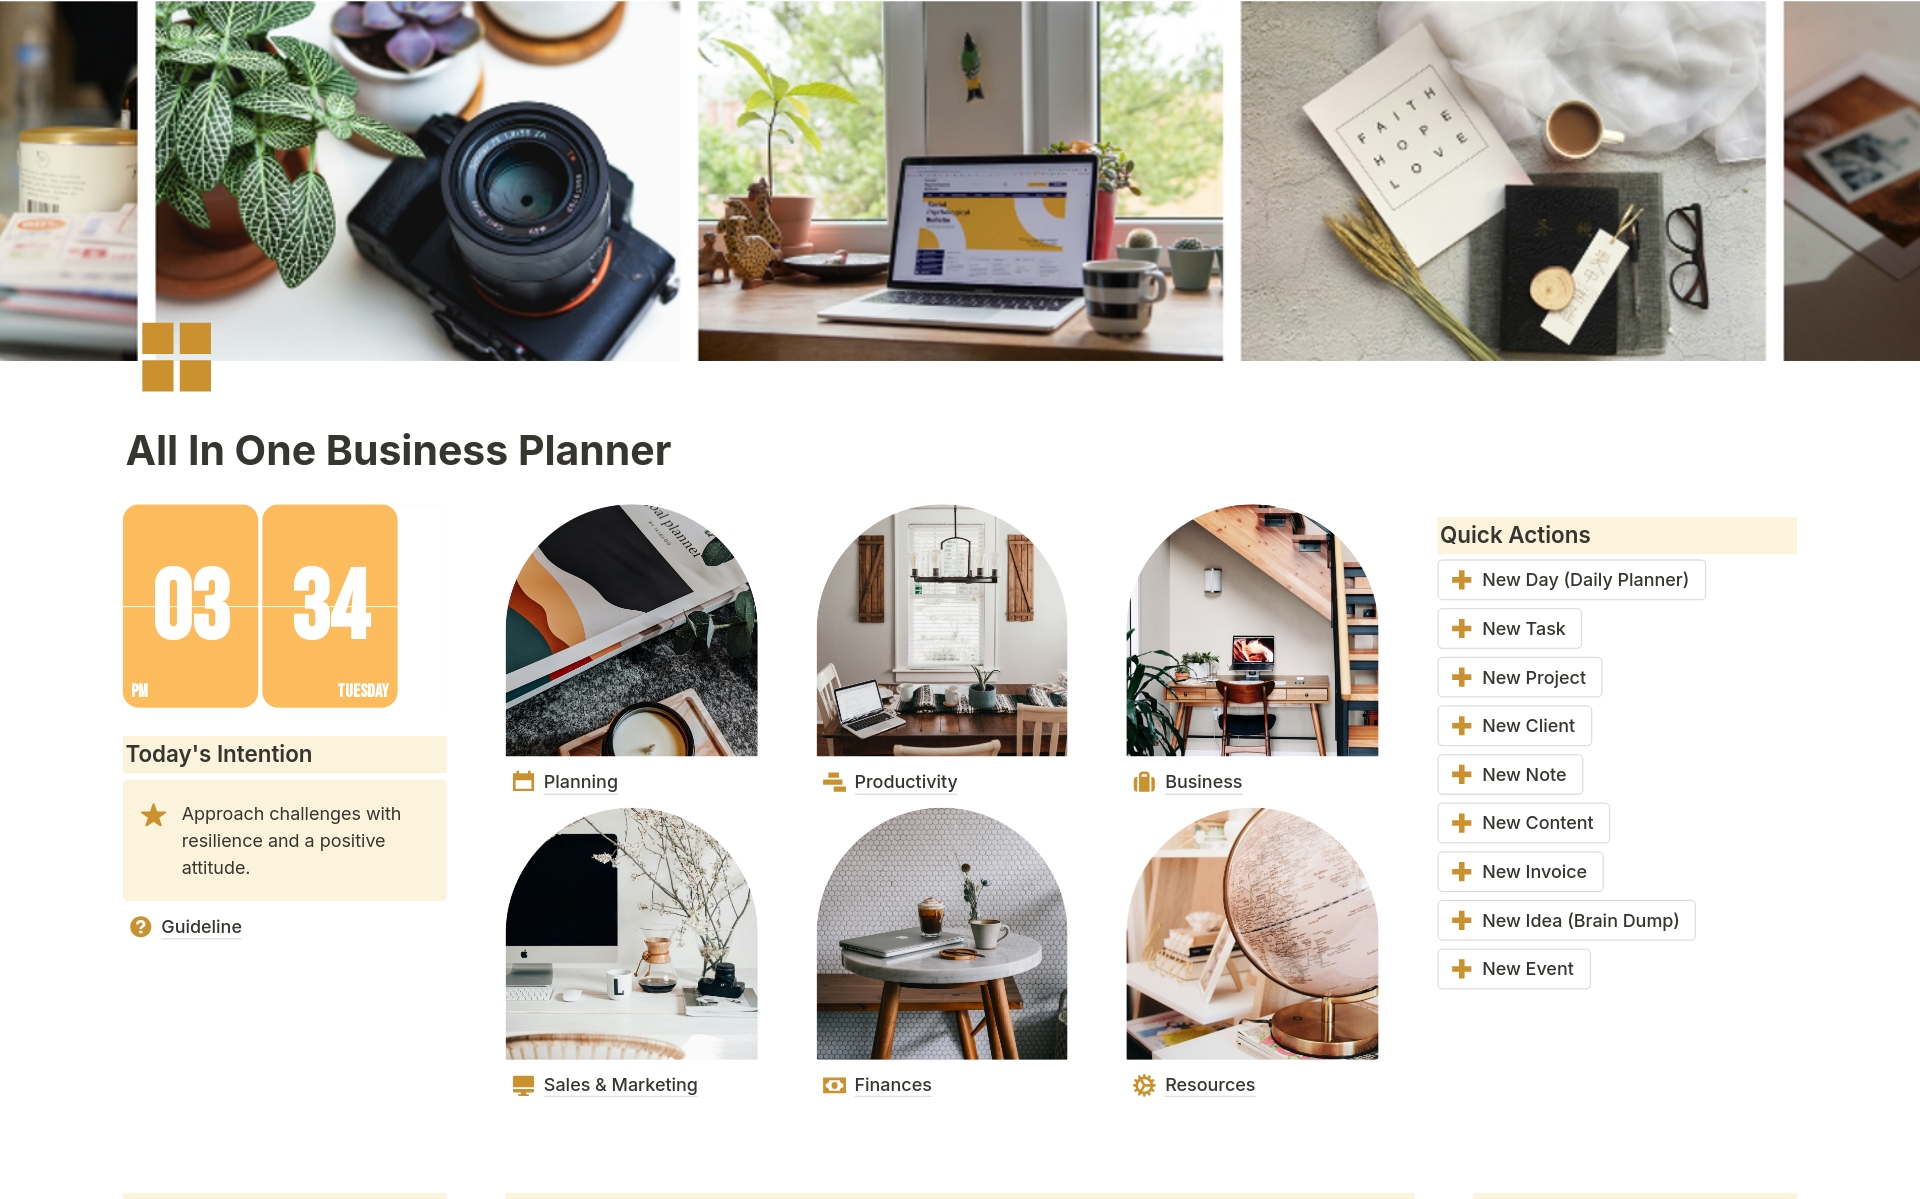 All In One Business Planner and Project Management님의 템플릿 미리보기